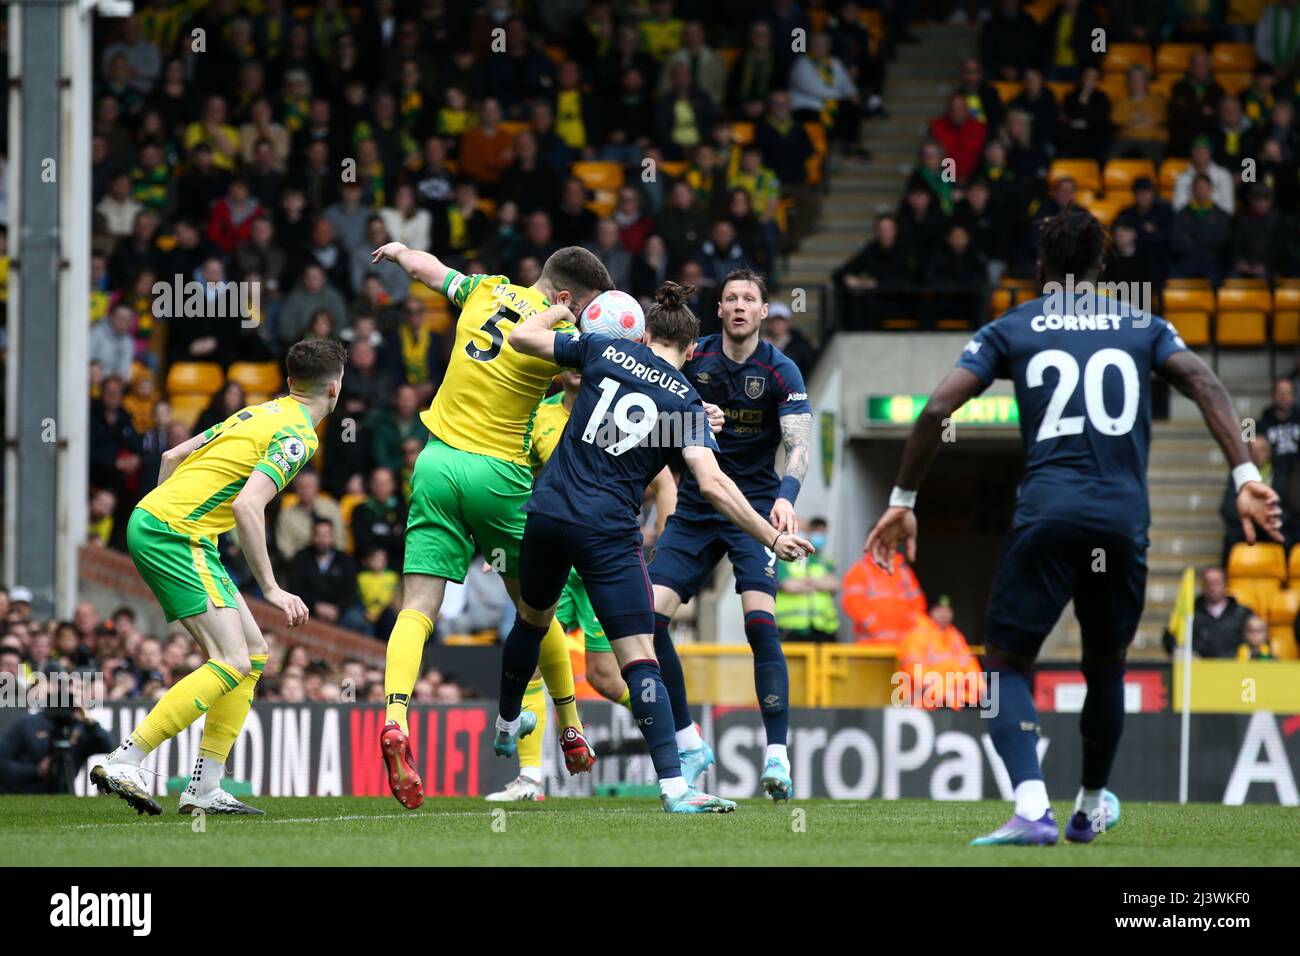 Grant Hanley #5 of Norwich City and Jay Rodriguez #19 of Burnley challenge for a header in the Norwich box Stock Photo